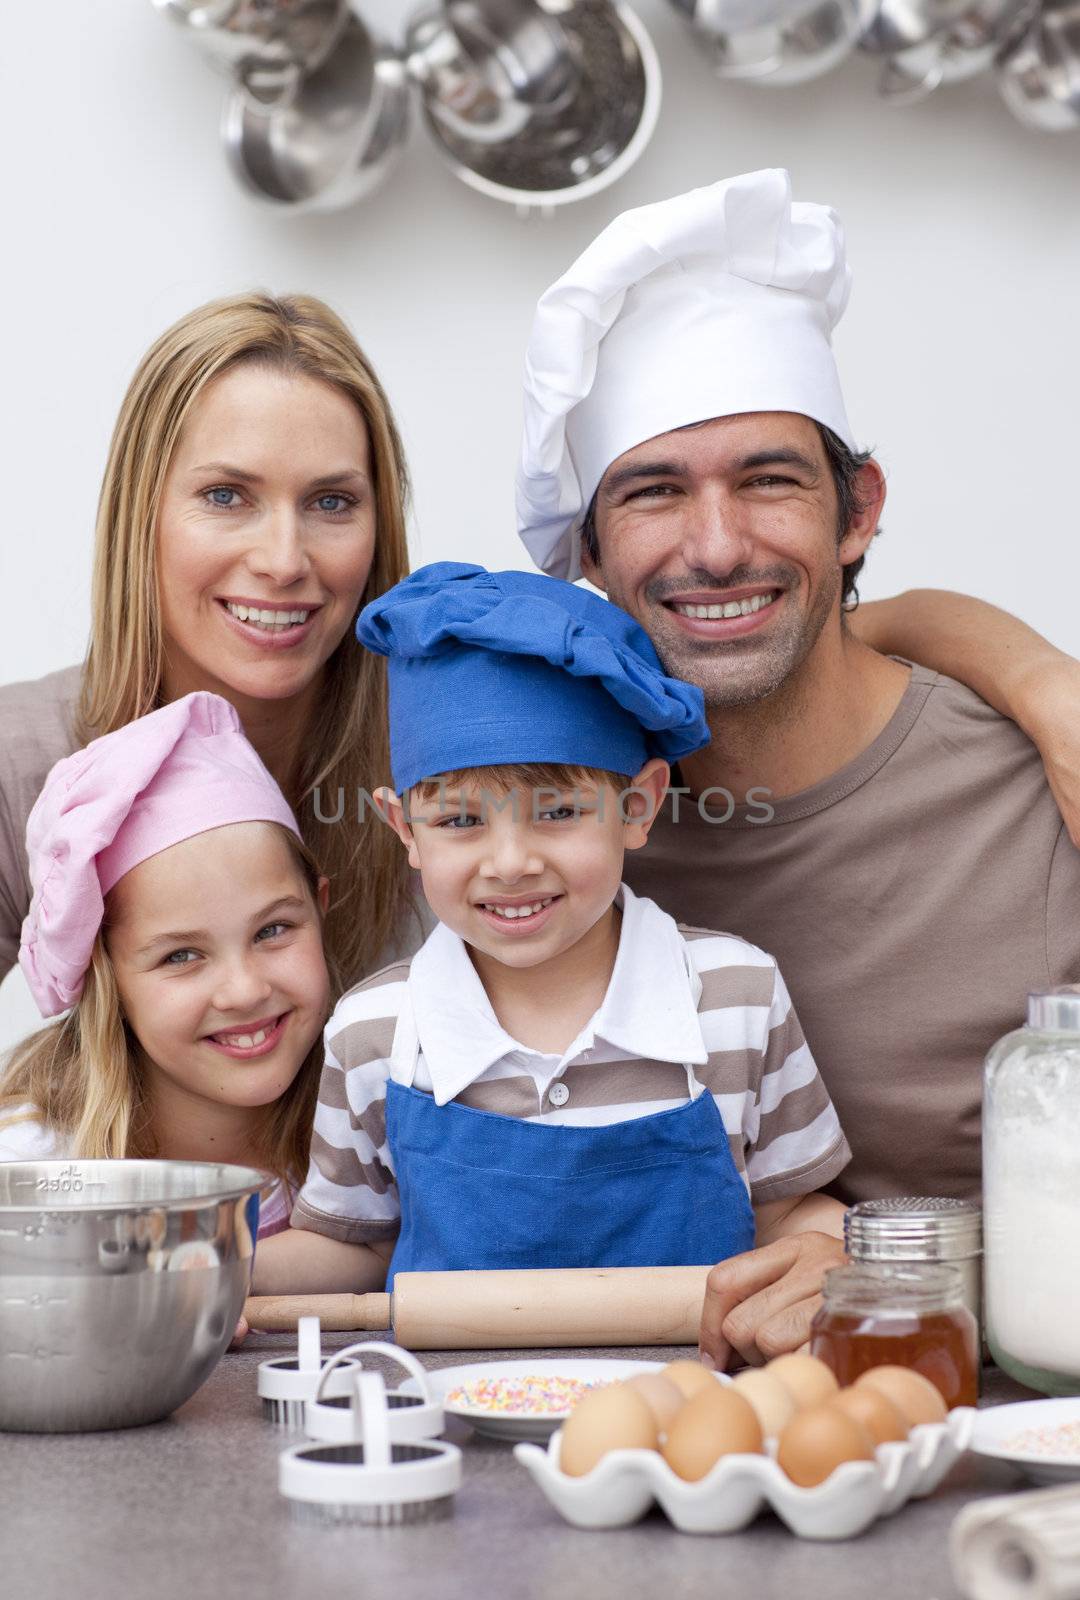 Portrait of family baking cookies in the kitchen